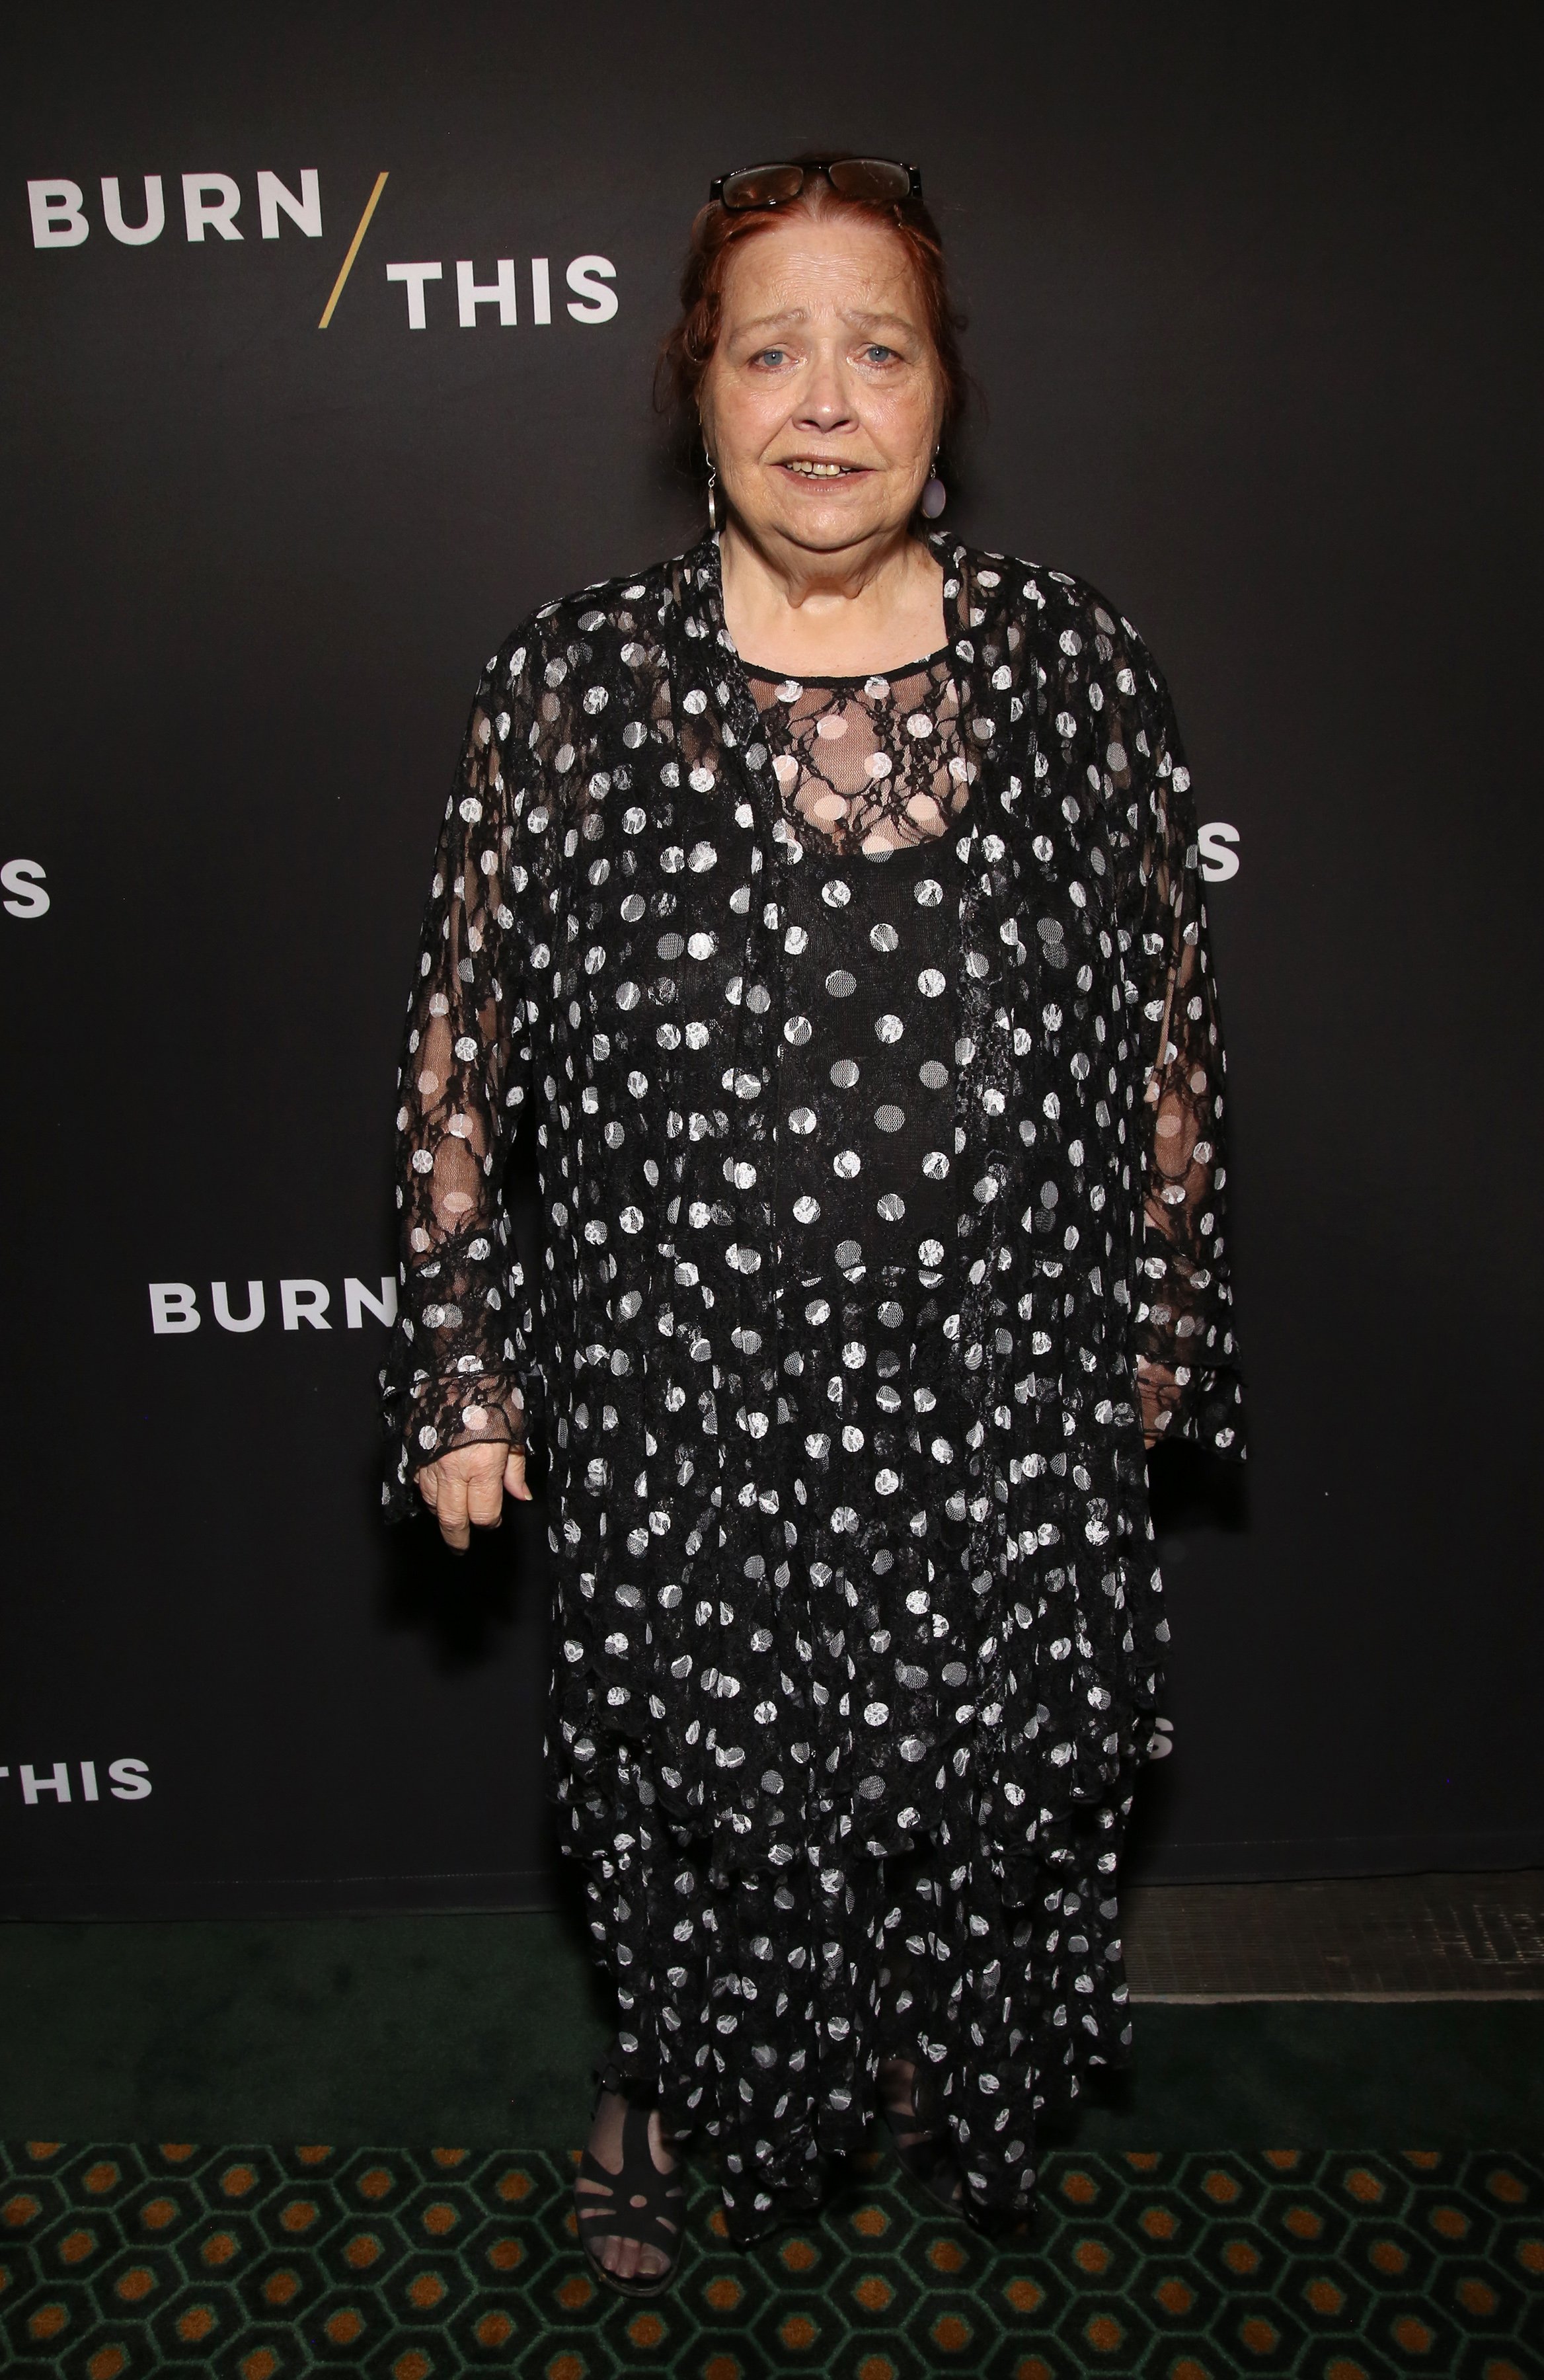 Conchata Ferrell attends the opening night of "Burn This" in New York City on April 15, 2019 | Photo: Getty Images